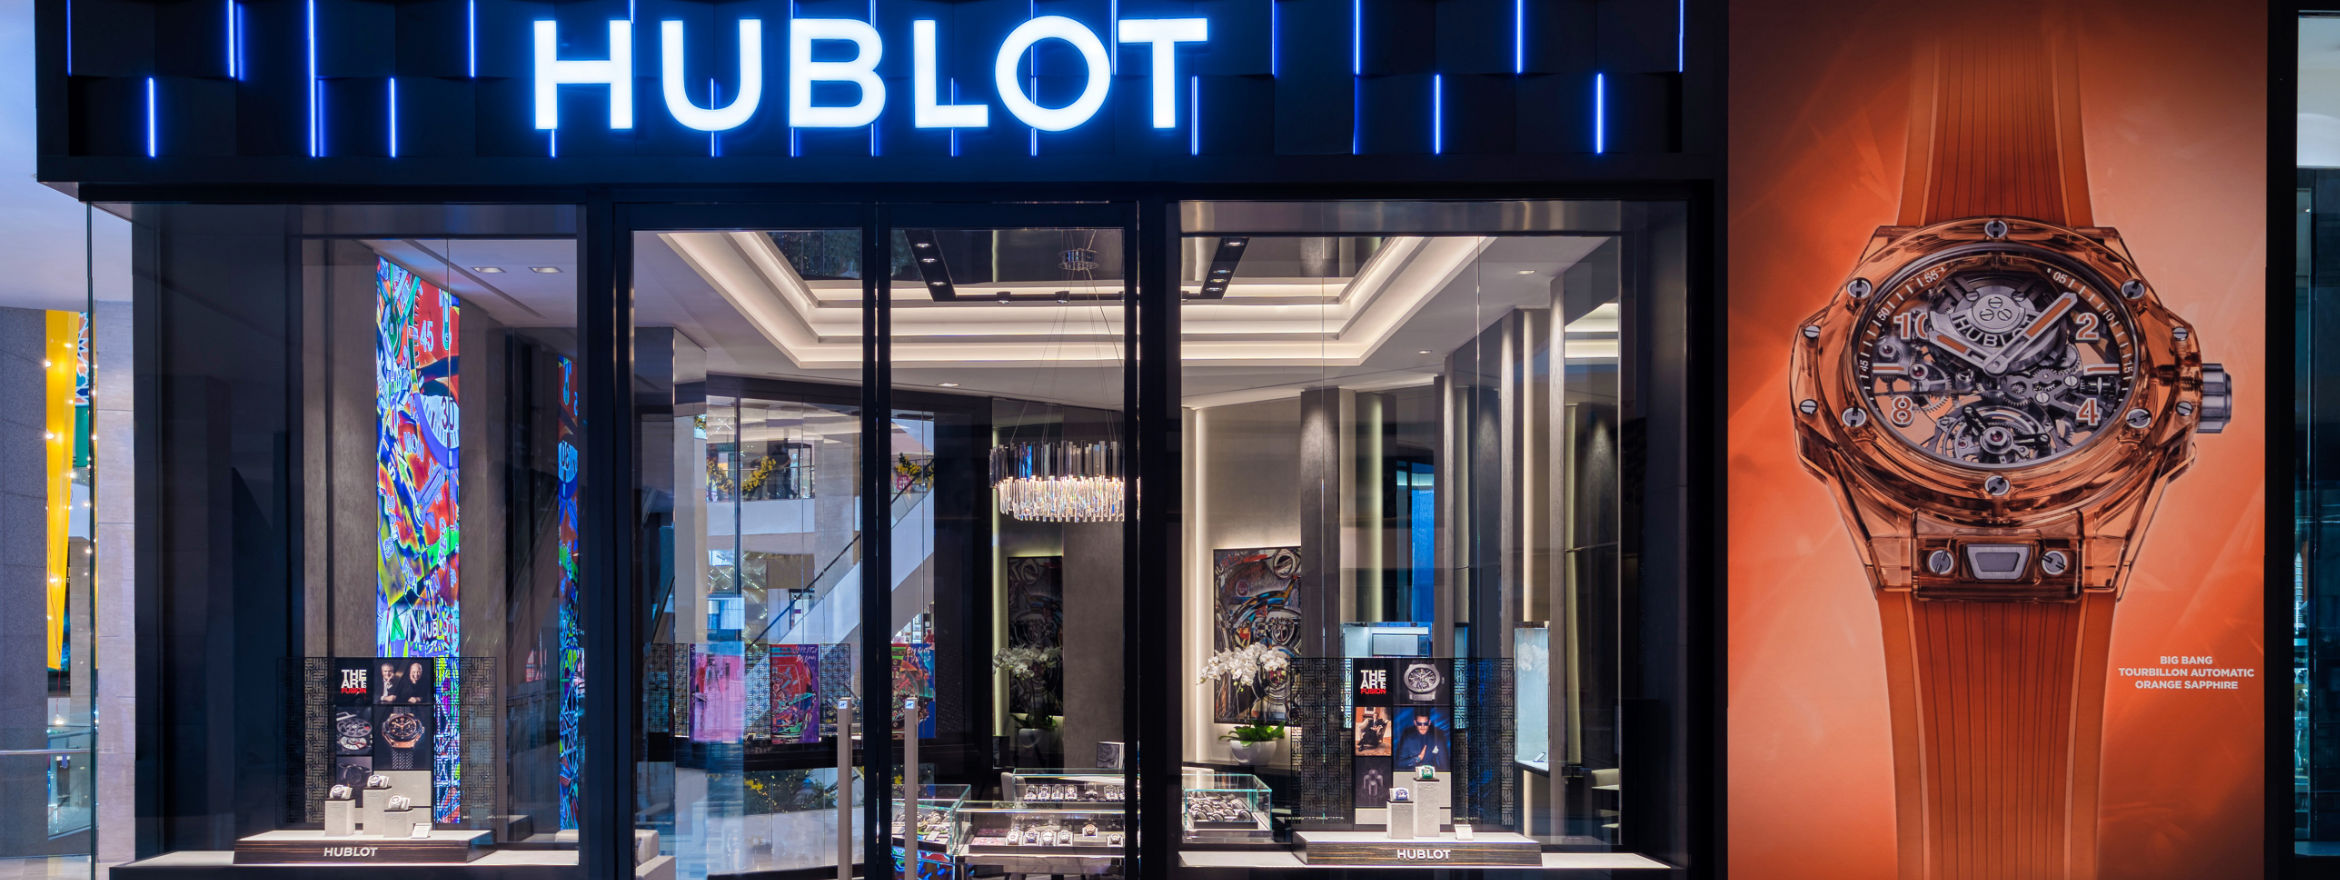 Hublot Opens a Second Boutique in Kuala Lumpur